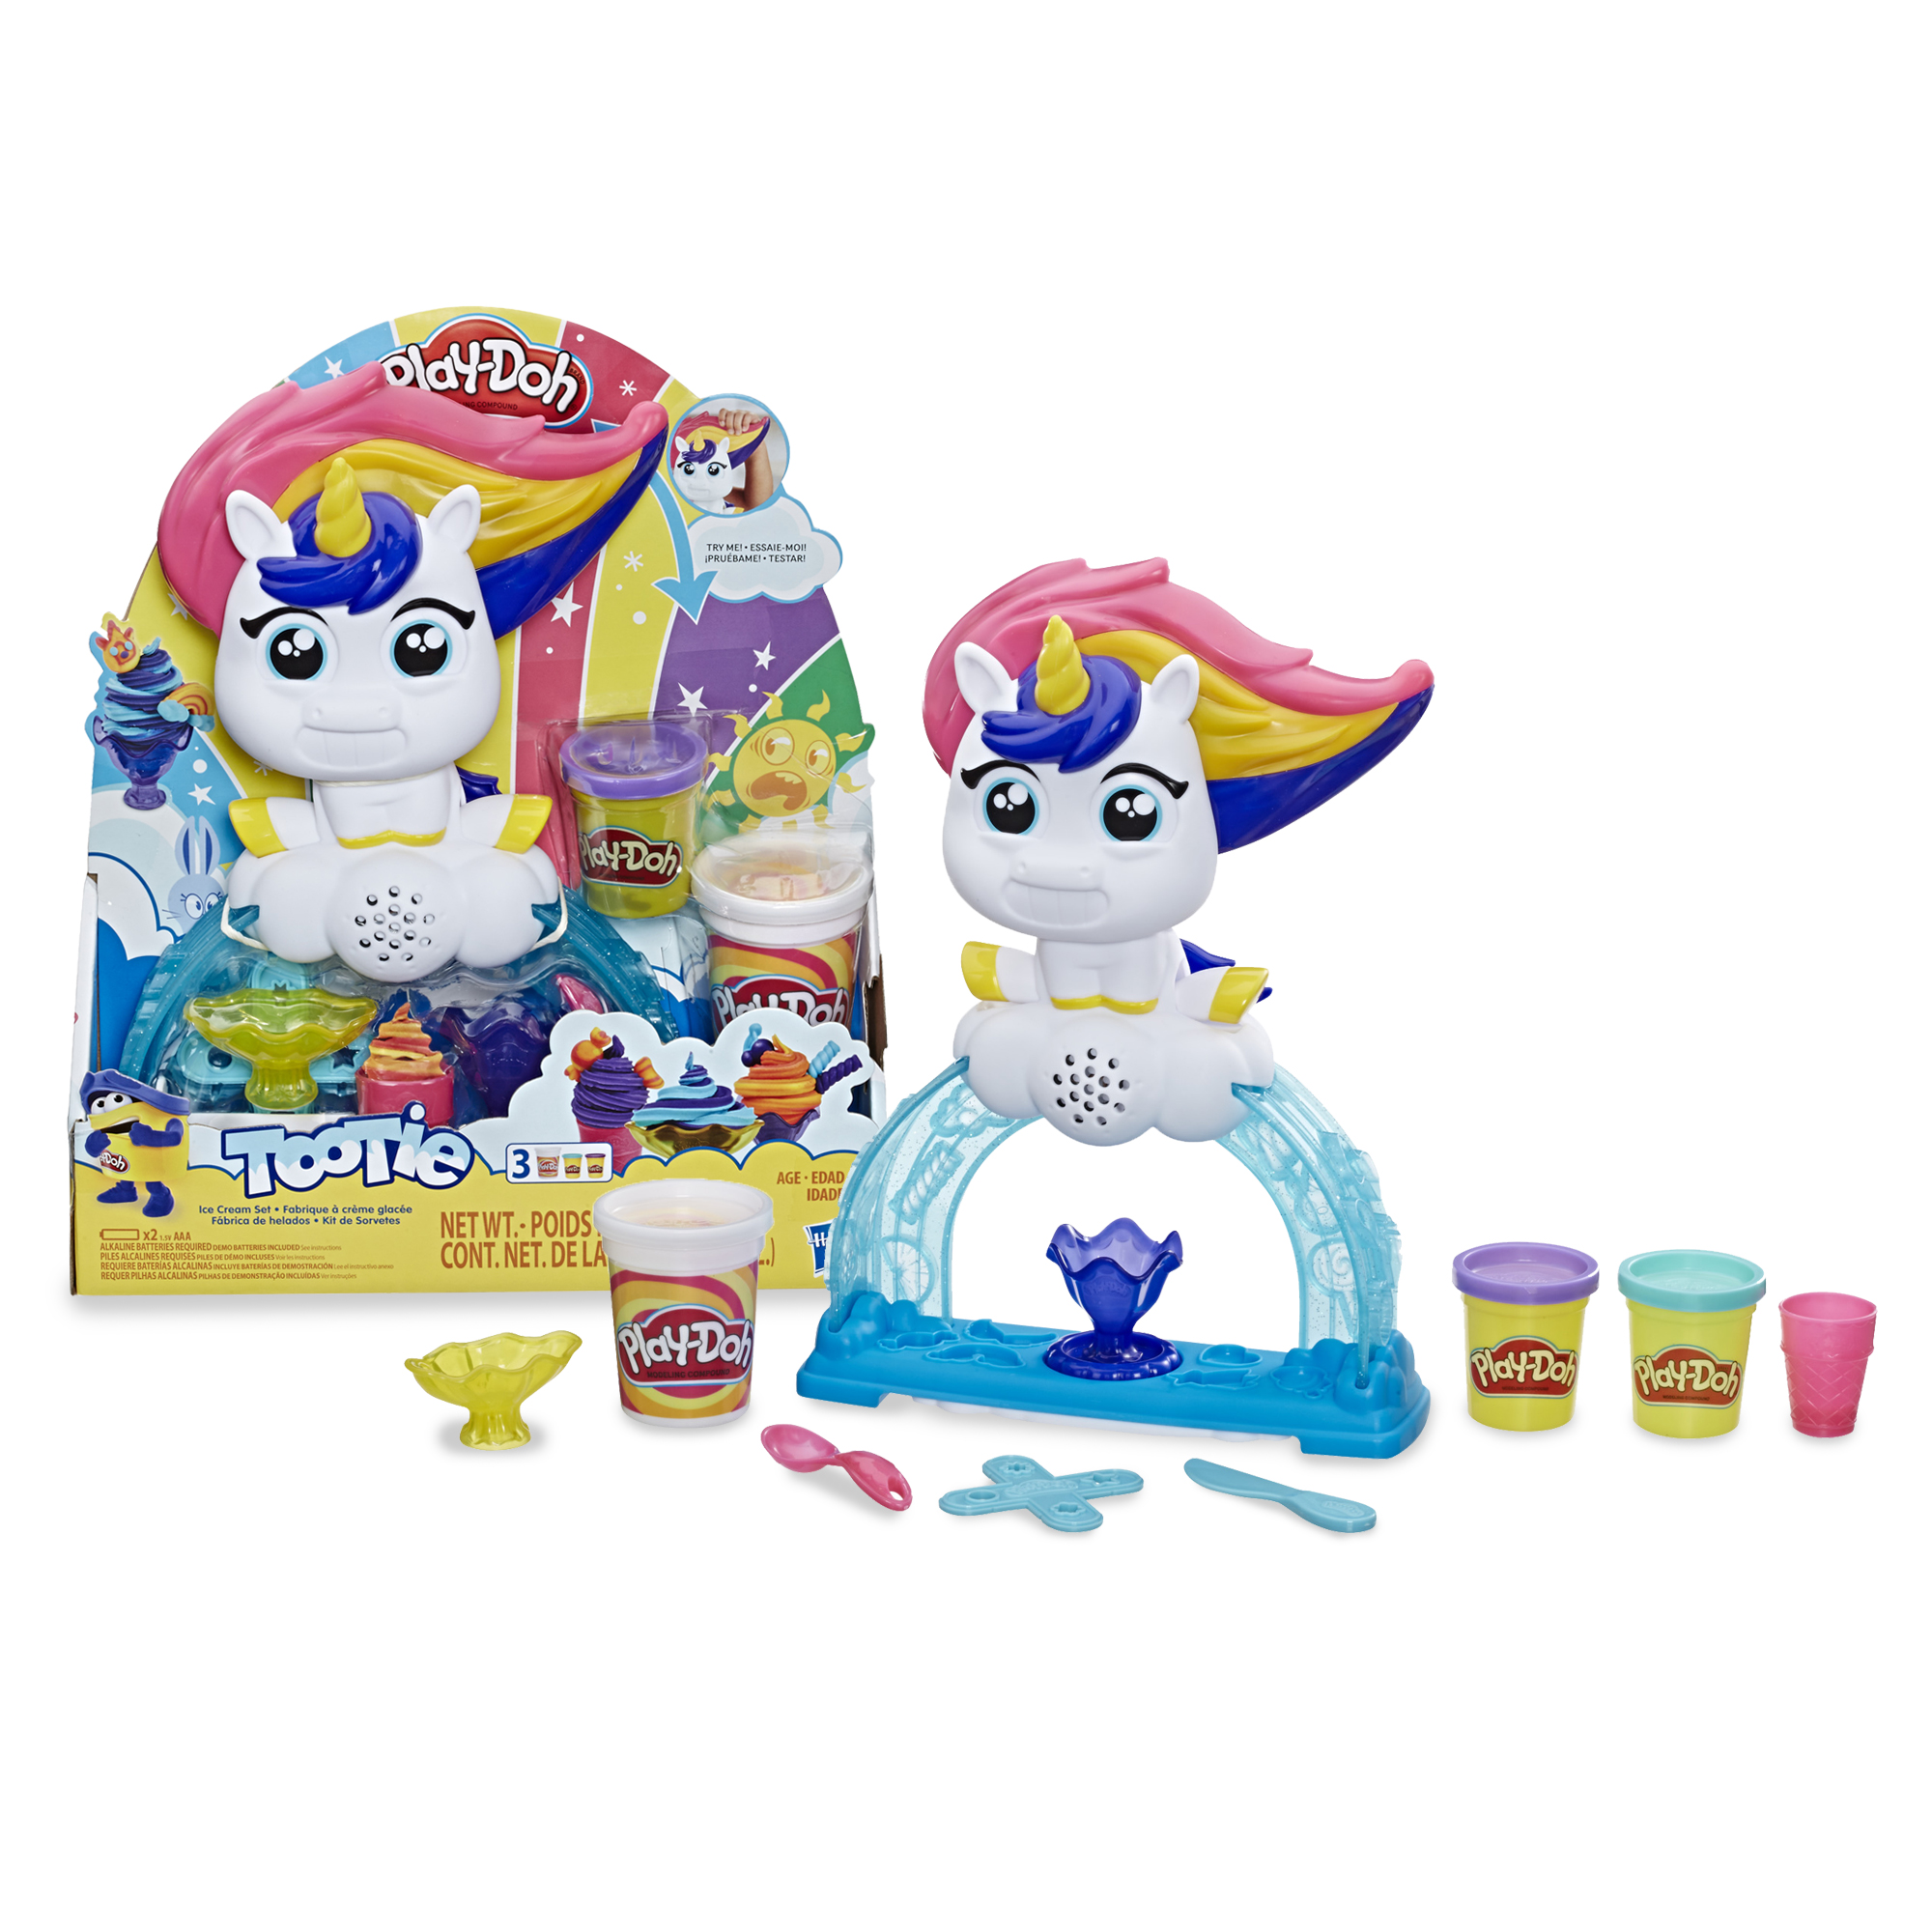 Play-Doh Tootie the Unicorn Ice Cream Set, 3 Cans of Color Swirl (8 oz) - image 1 of 11